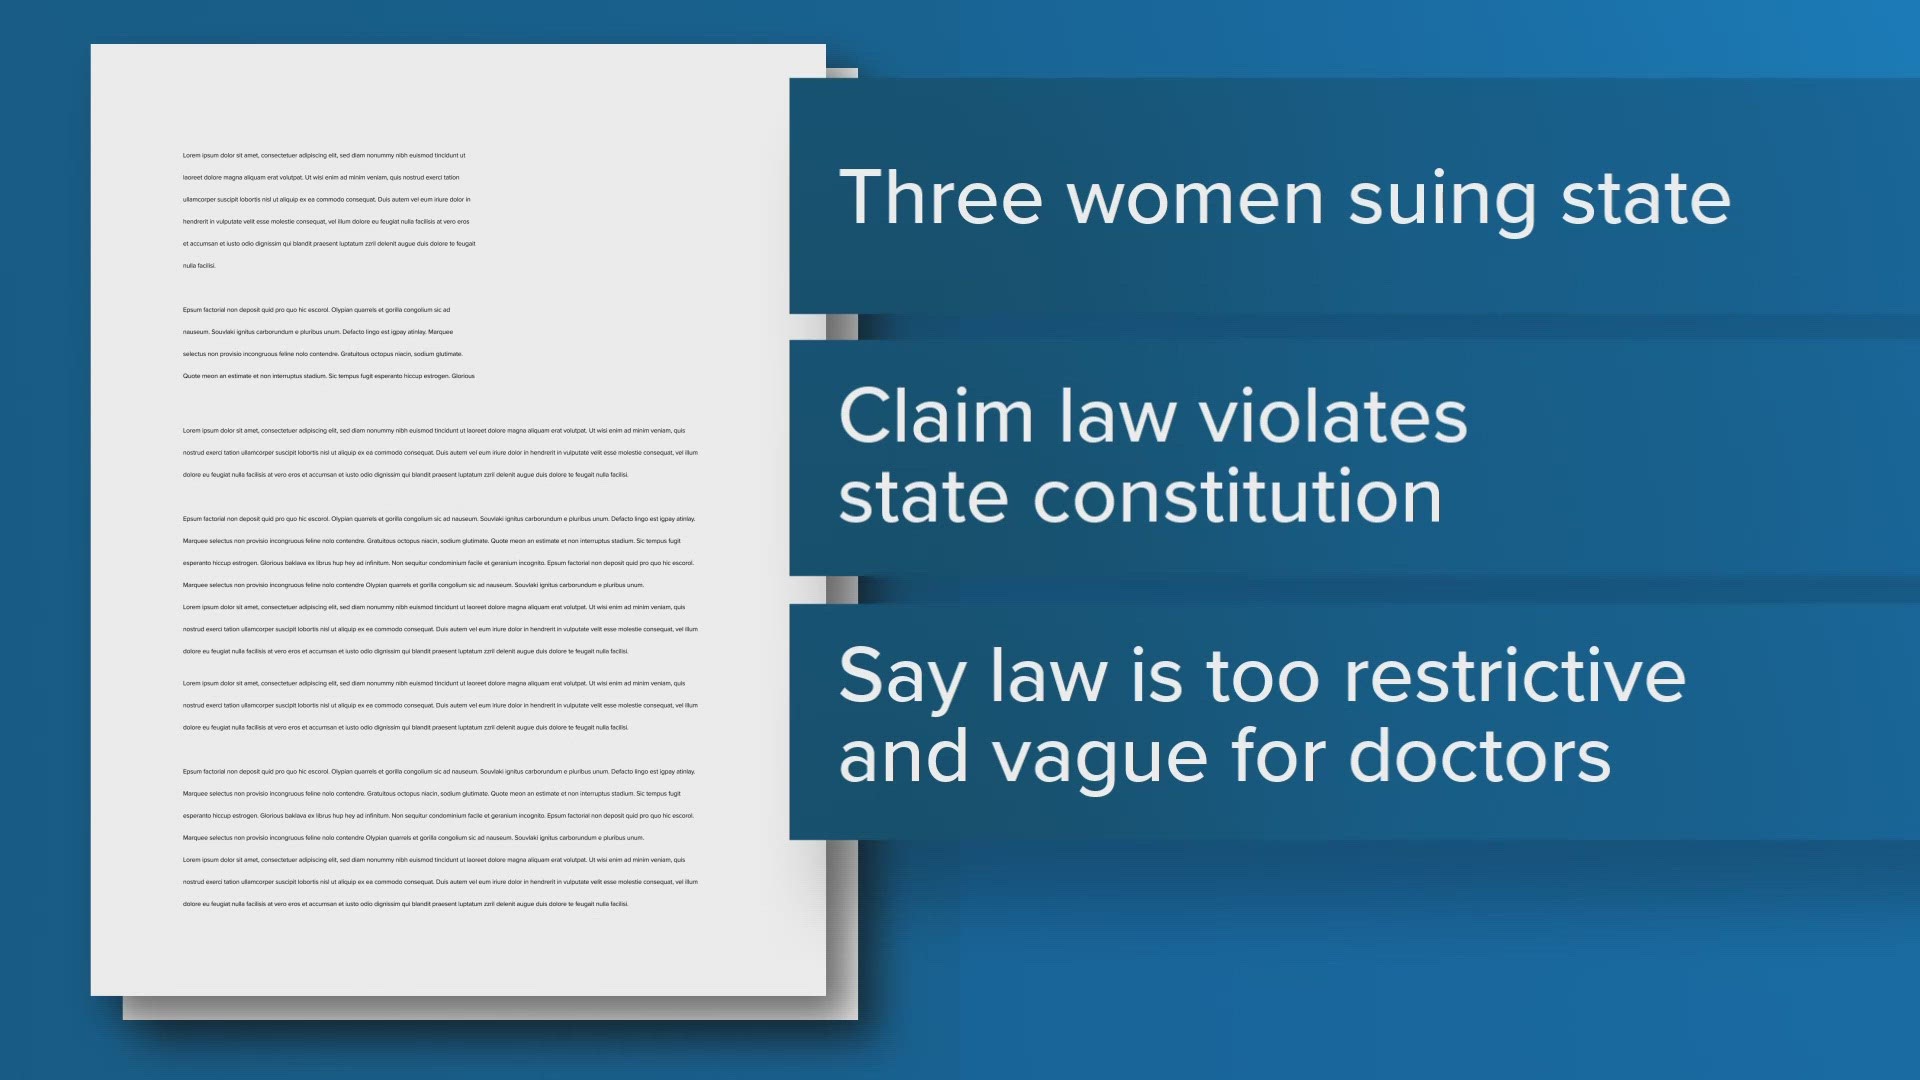 The plaintiffs claim the law is too restrictive and vague about when doctors can legally terminate a pregnancy with serious complications.